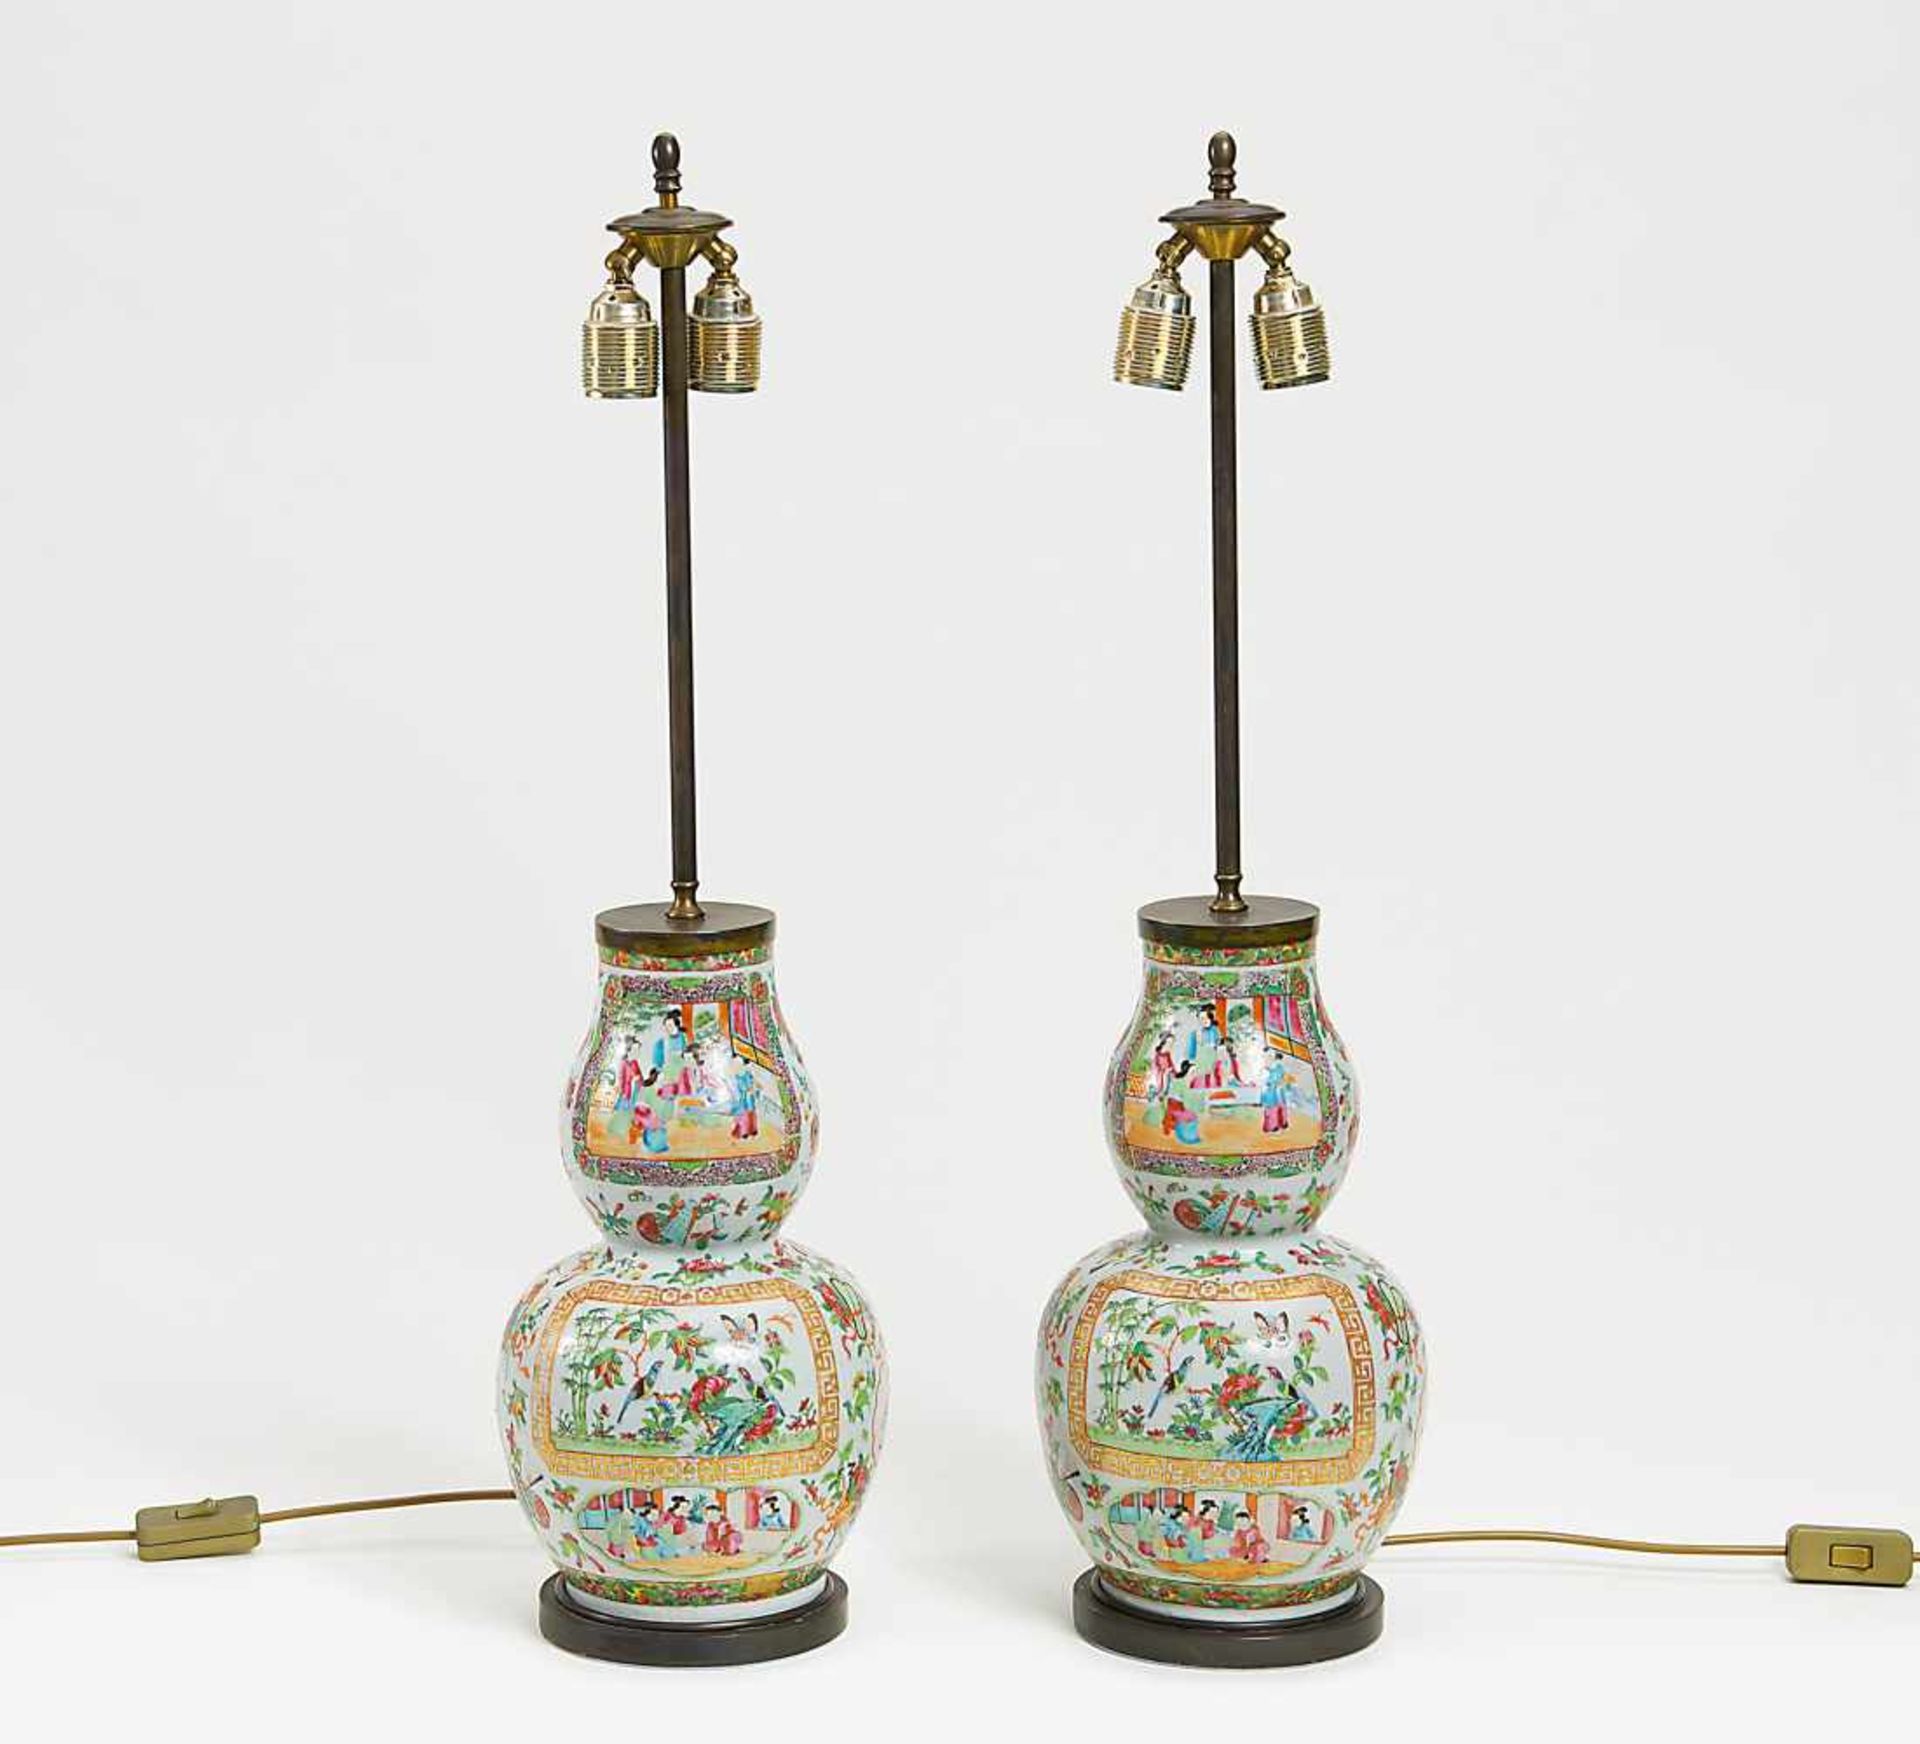 PAIR OF VASES MOUNTED AS LAMPS.